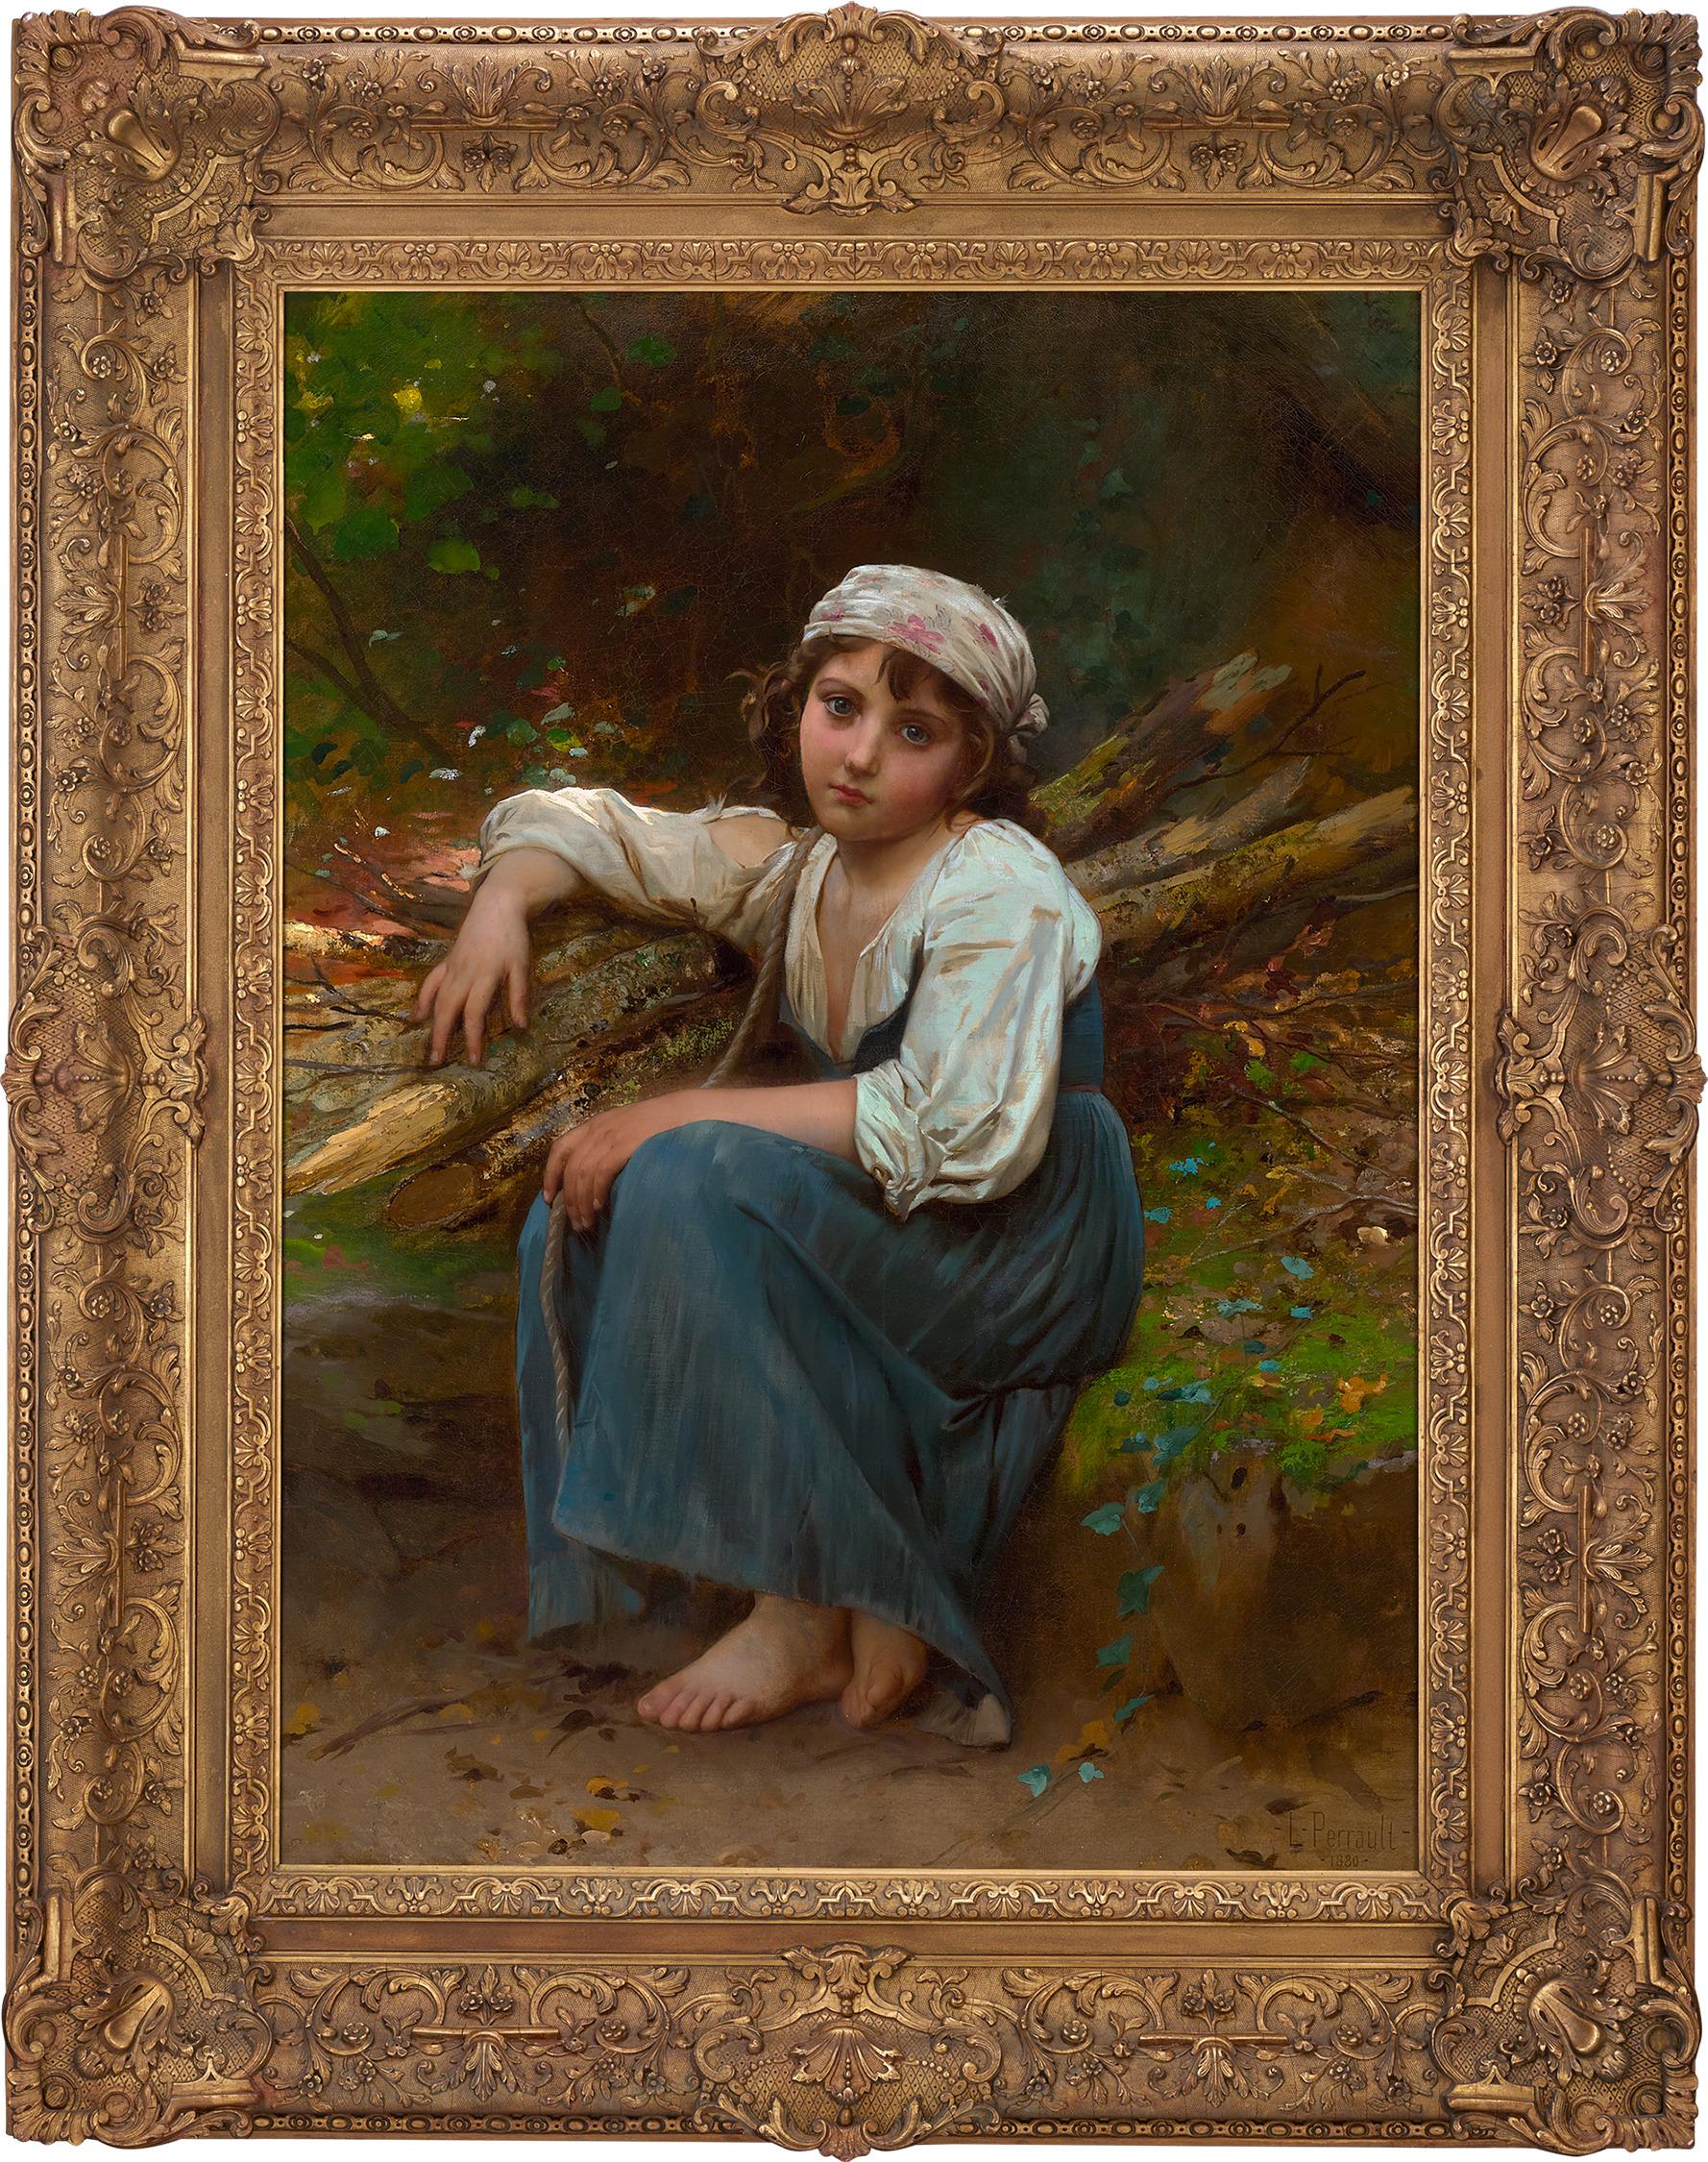 The Wood Gatherer by Léon-Jean-Basile Perrault - Painting by Lean Jean Bazile Perrault